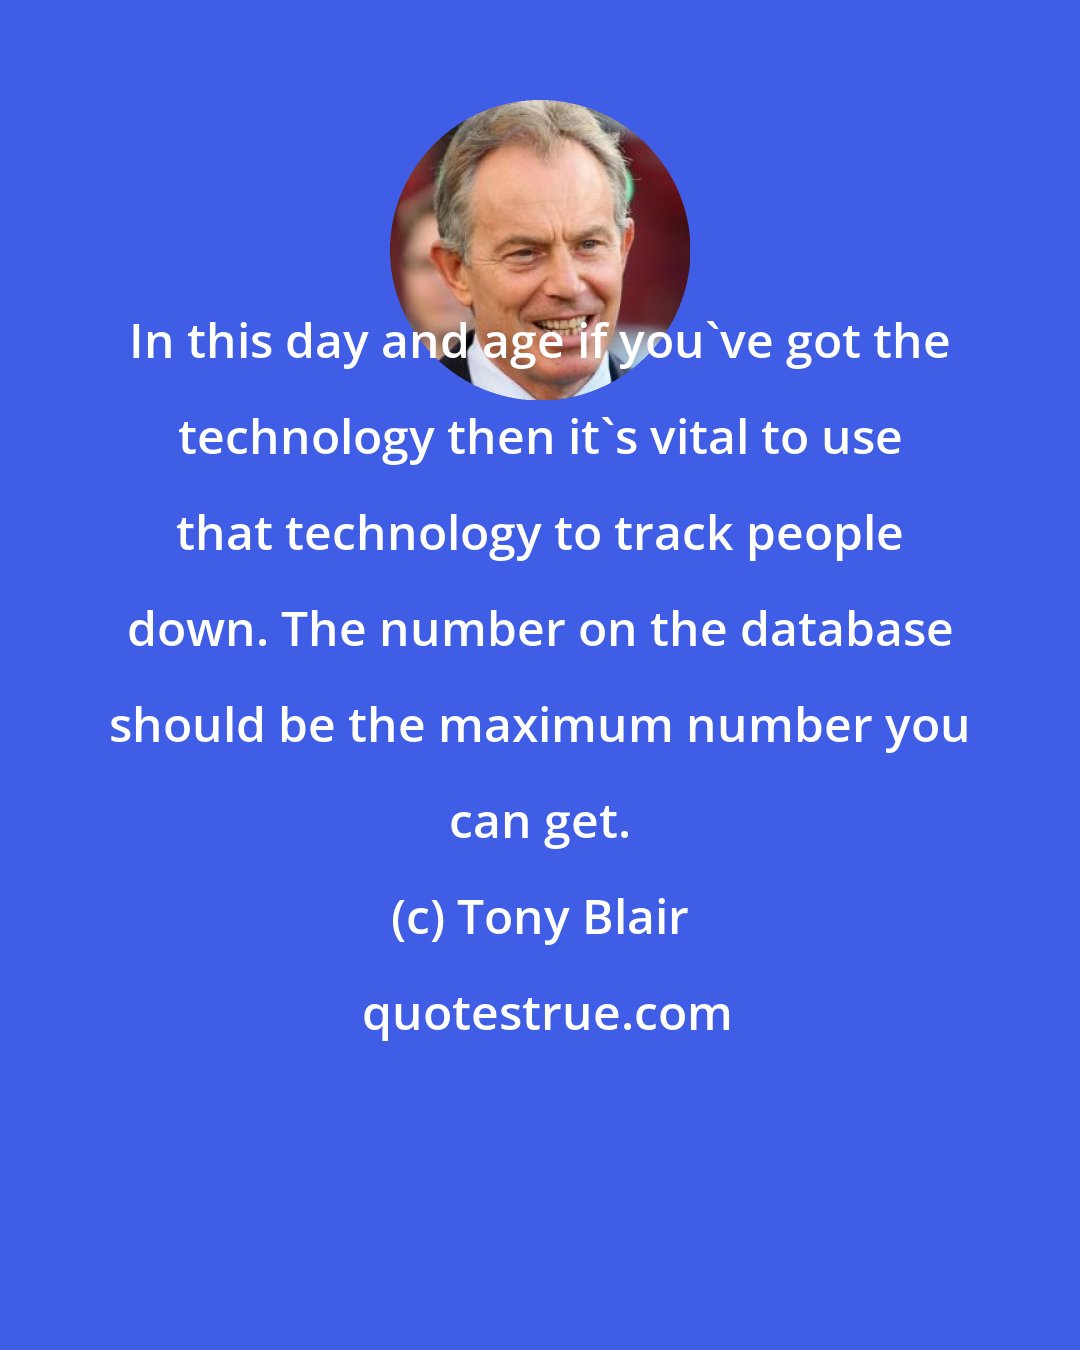 Tony Blair: In this day and age if you've got the technology then it's vital to use that technology to track people down. The number on the database should be the maximum number you can get.